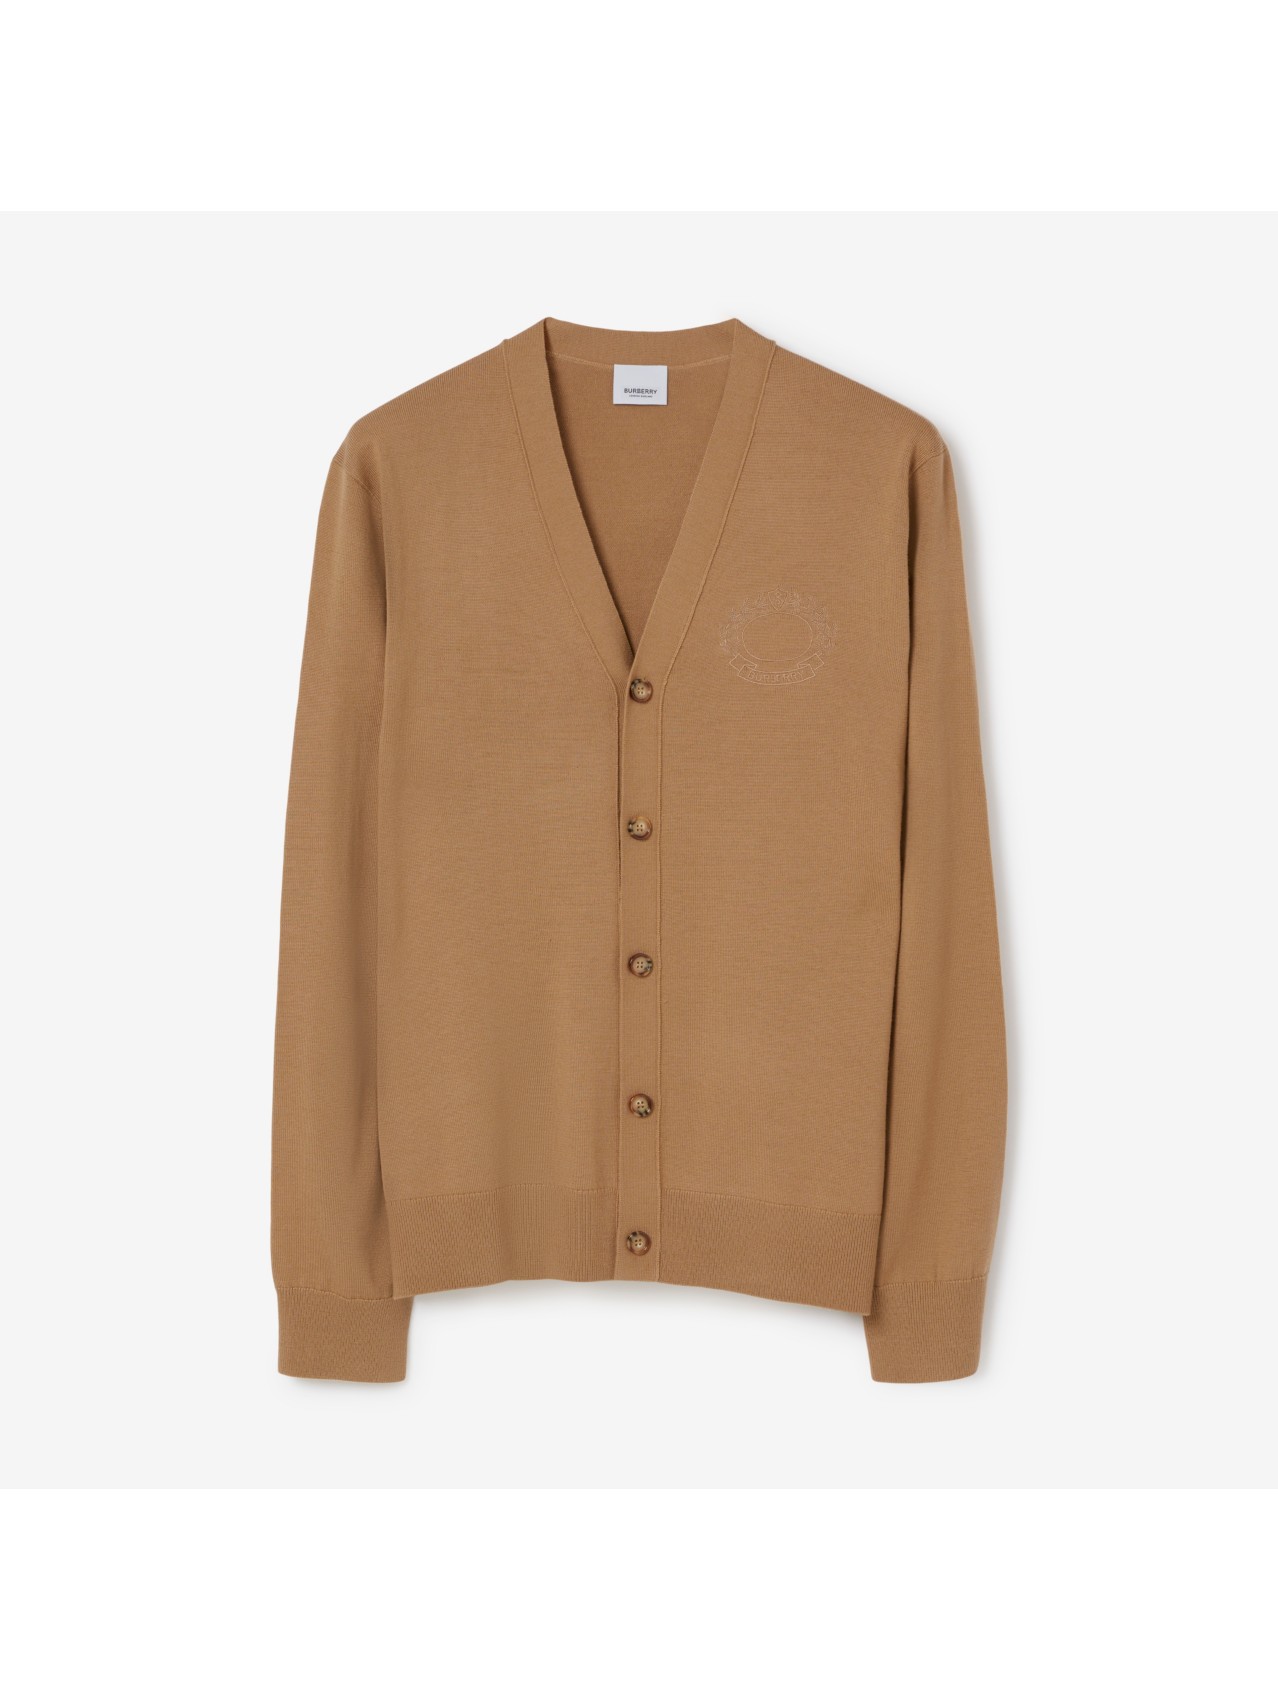 Men’s Designer Knitwear | Sweaters & Cardigans | Burberry® Official